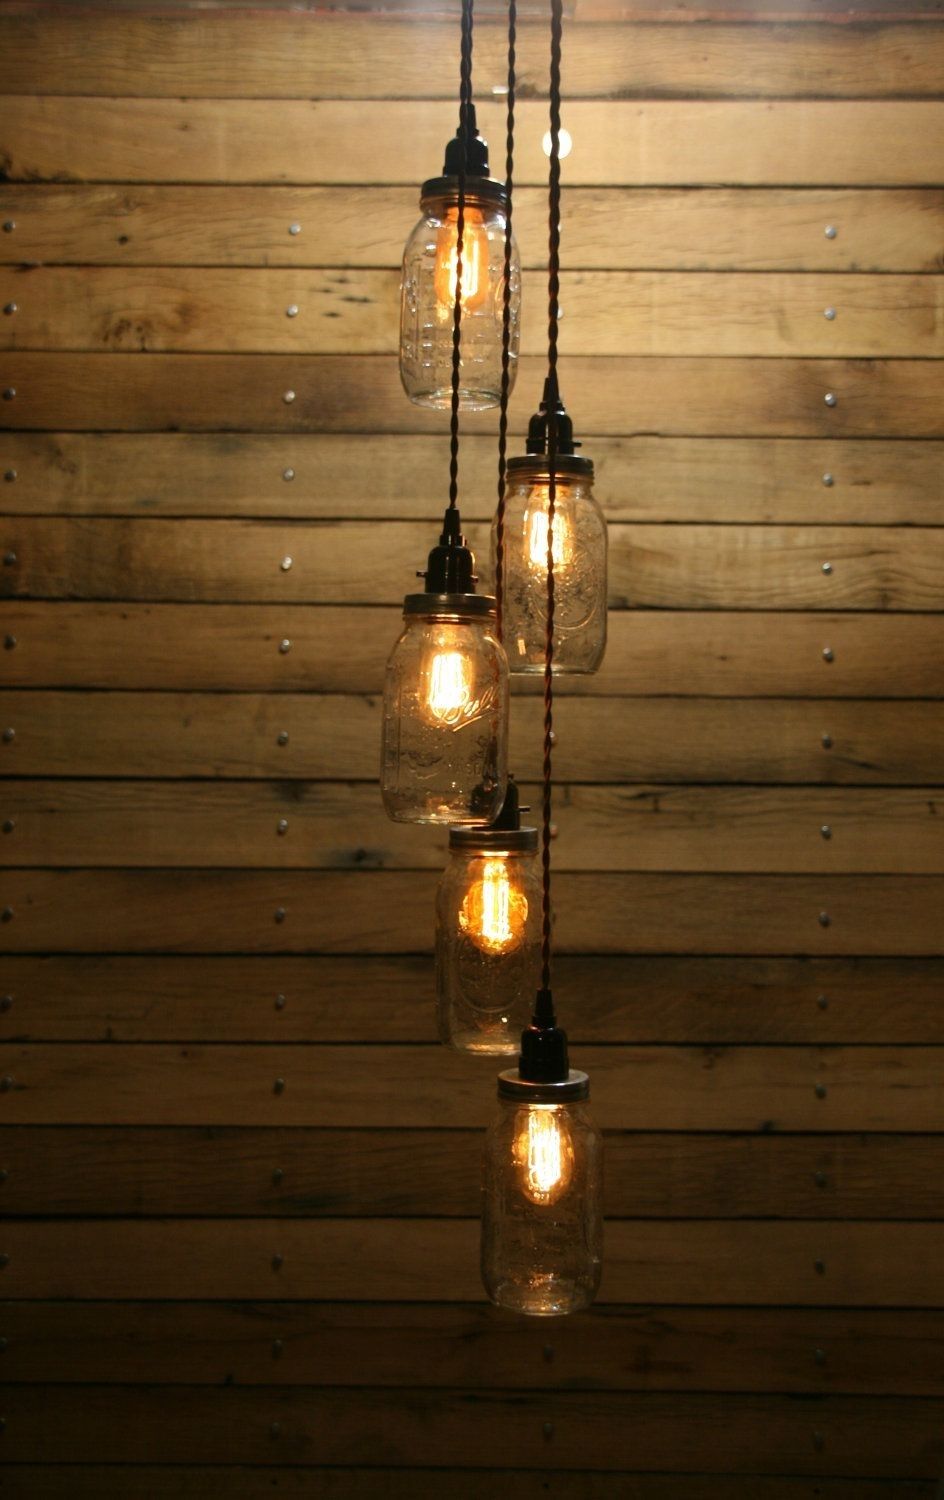 Captivating Homemade Hanging Lamps Gallery – Best Inspiration Home Inside Homemade Outdoor Hanging Lights (View 4 of 15)